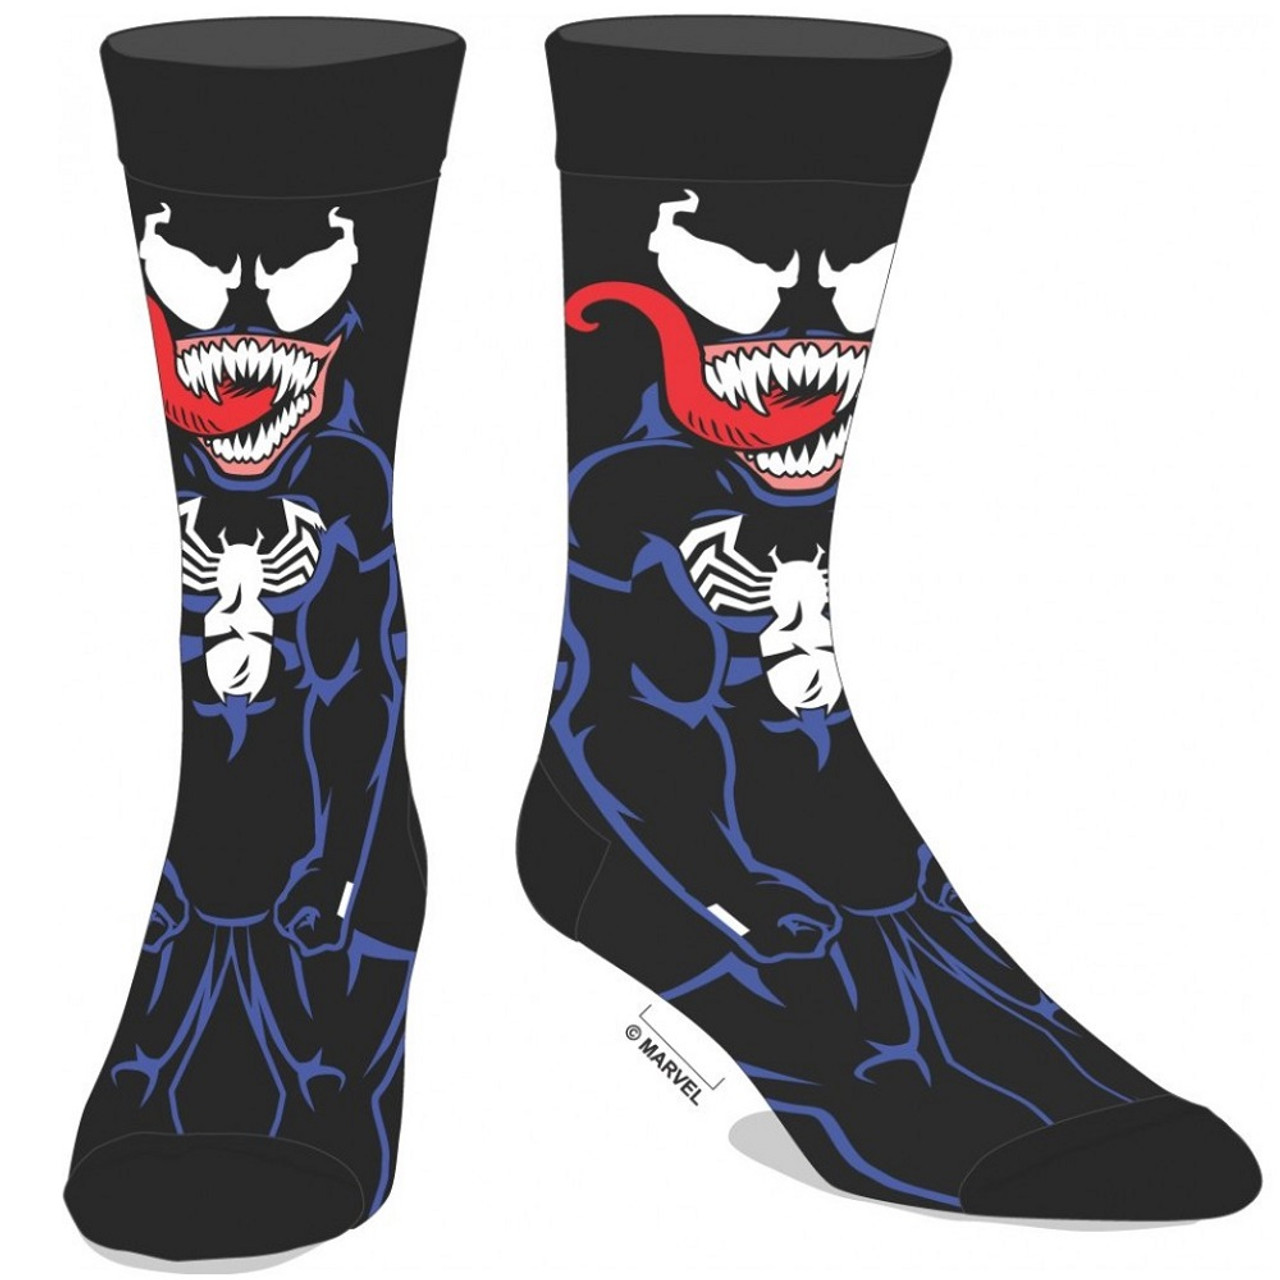 Bioworld Marvel Venom 360 Crew Socks Character Collection Package Spiderman Adult Mens Os - Multi/Colour